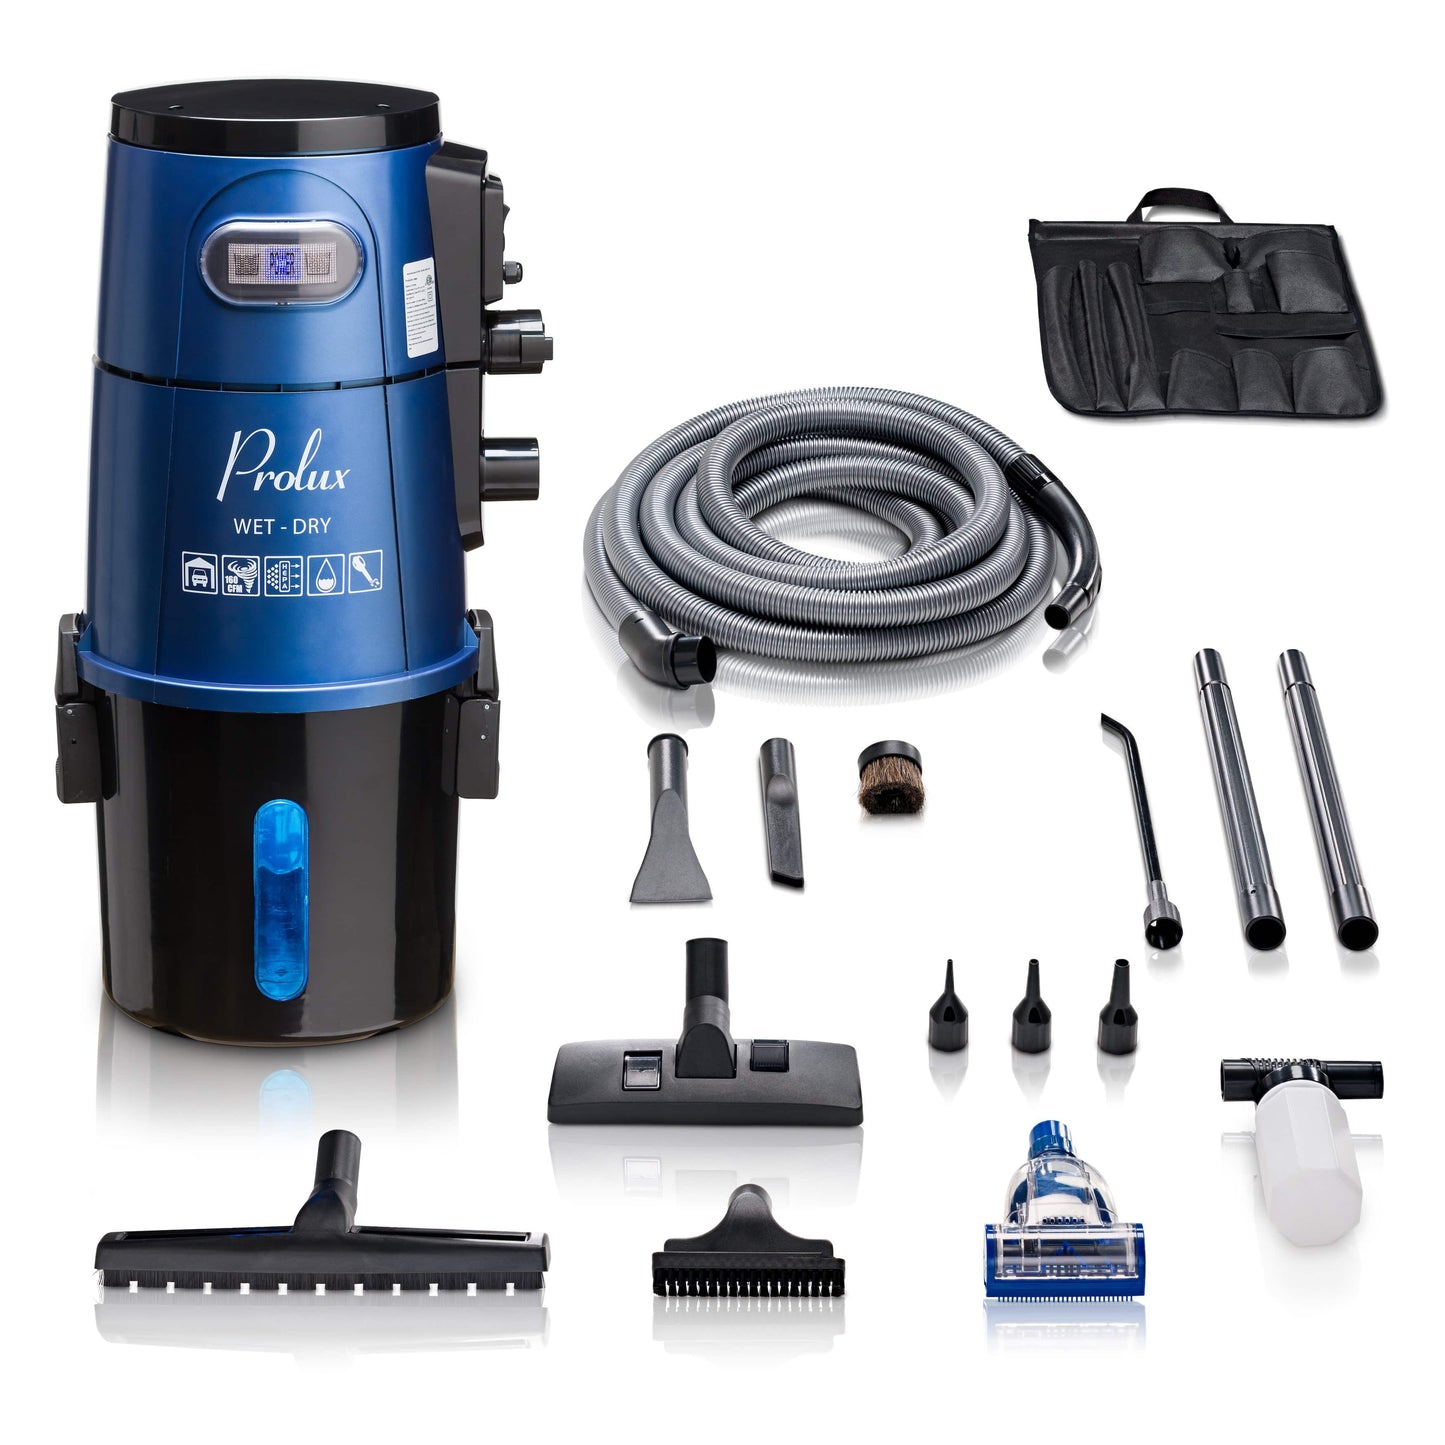 Demo Model Prolux Professional Shop Wall Mounted Garage Vac Wet Dry Pick Up